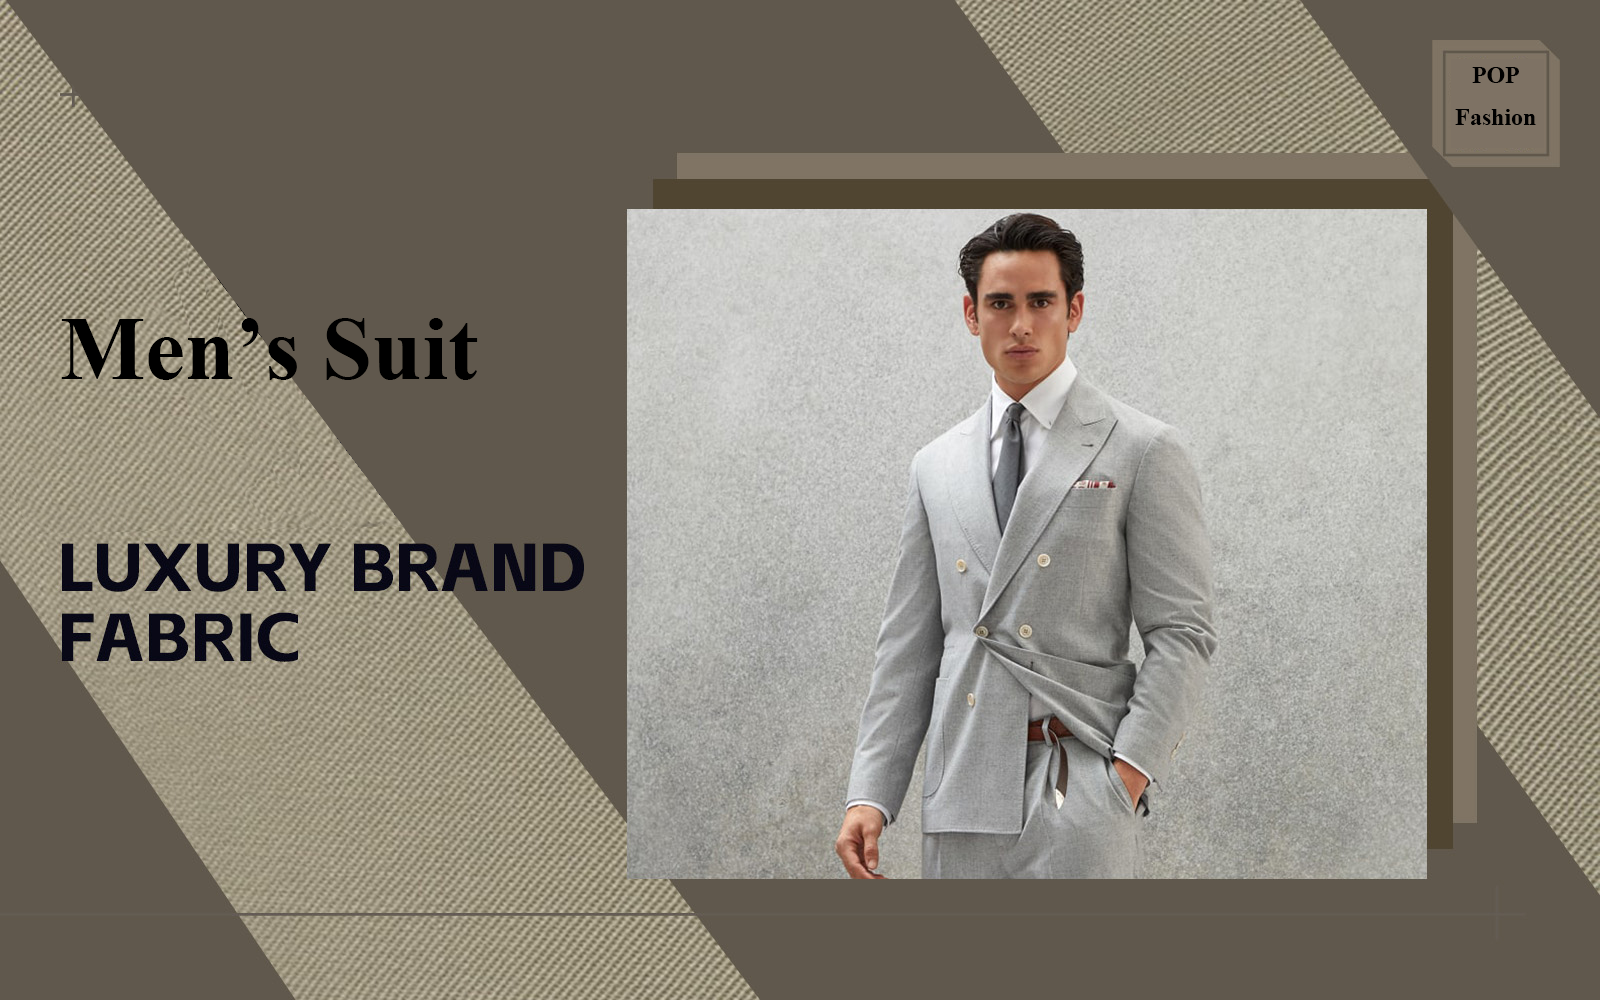 The Fabric Analysis of Men's Suit